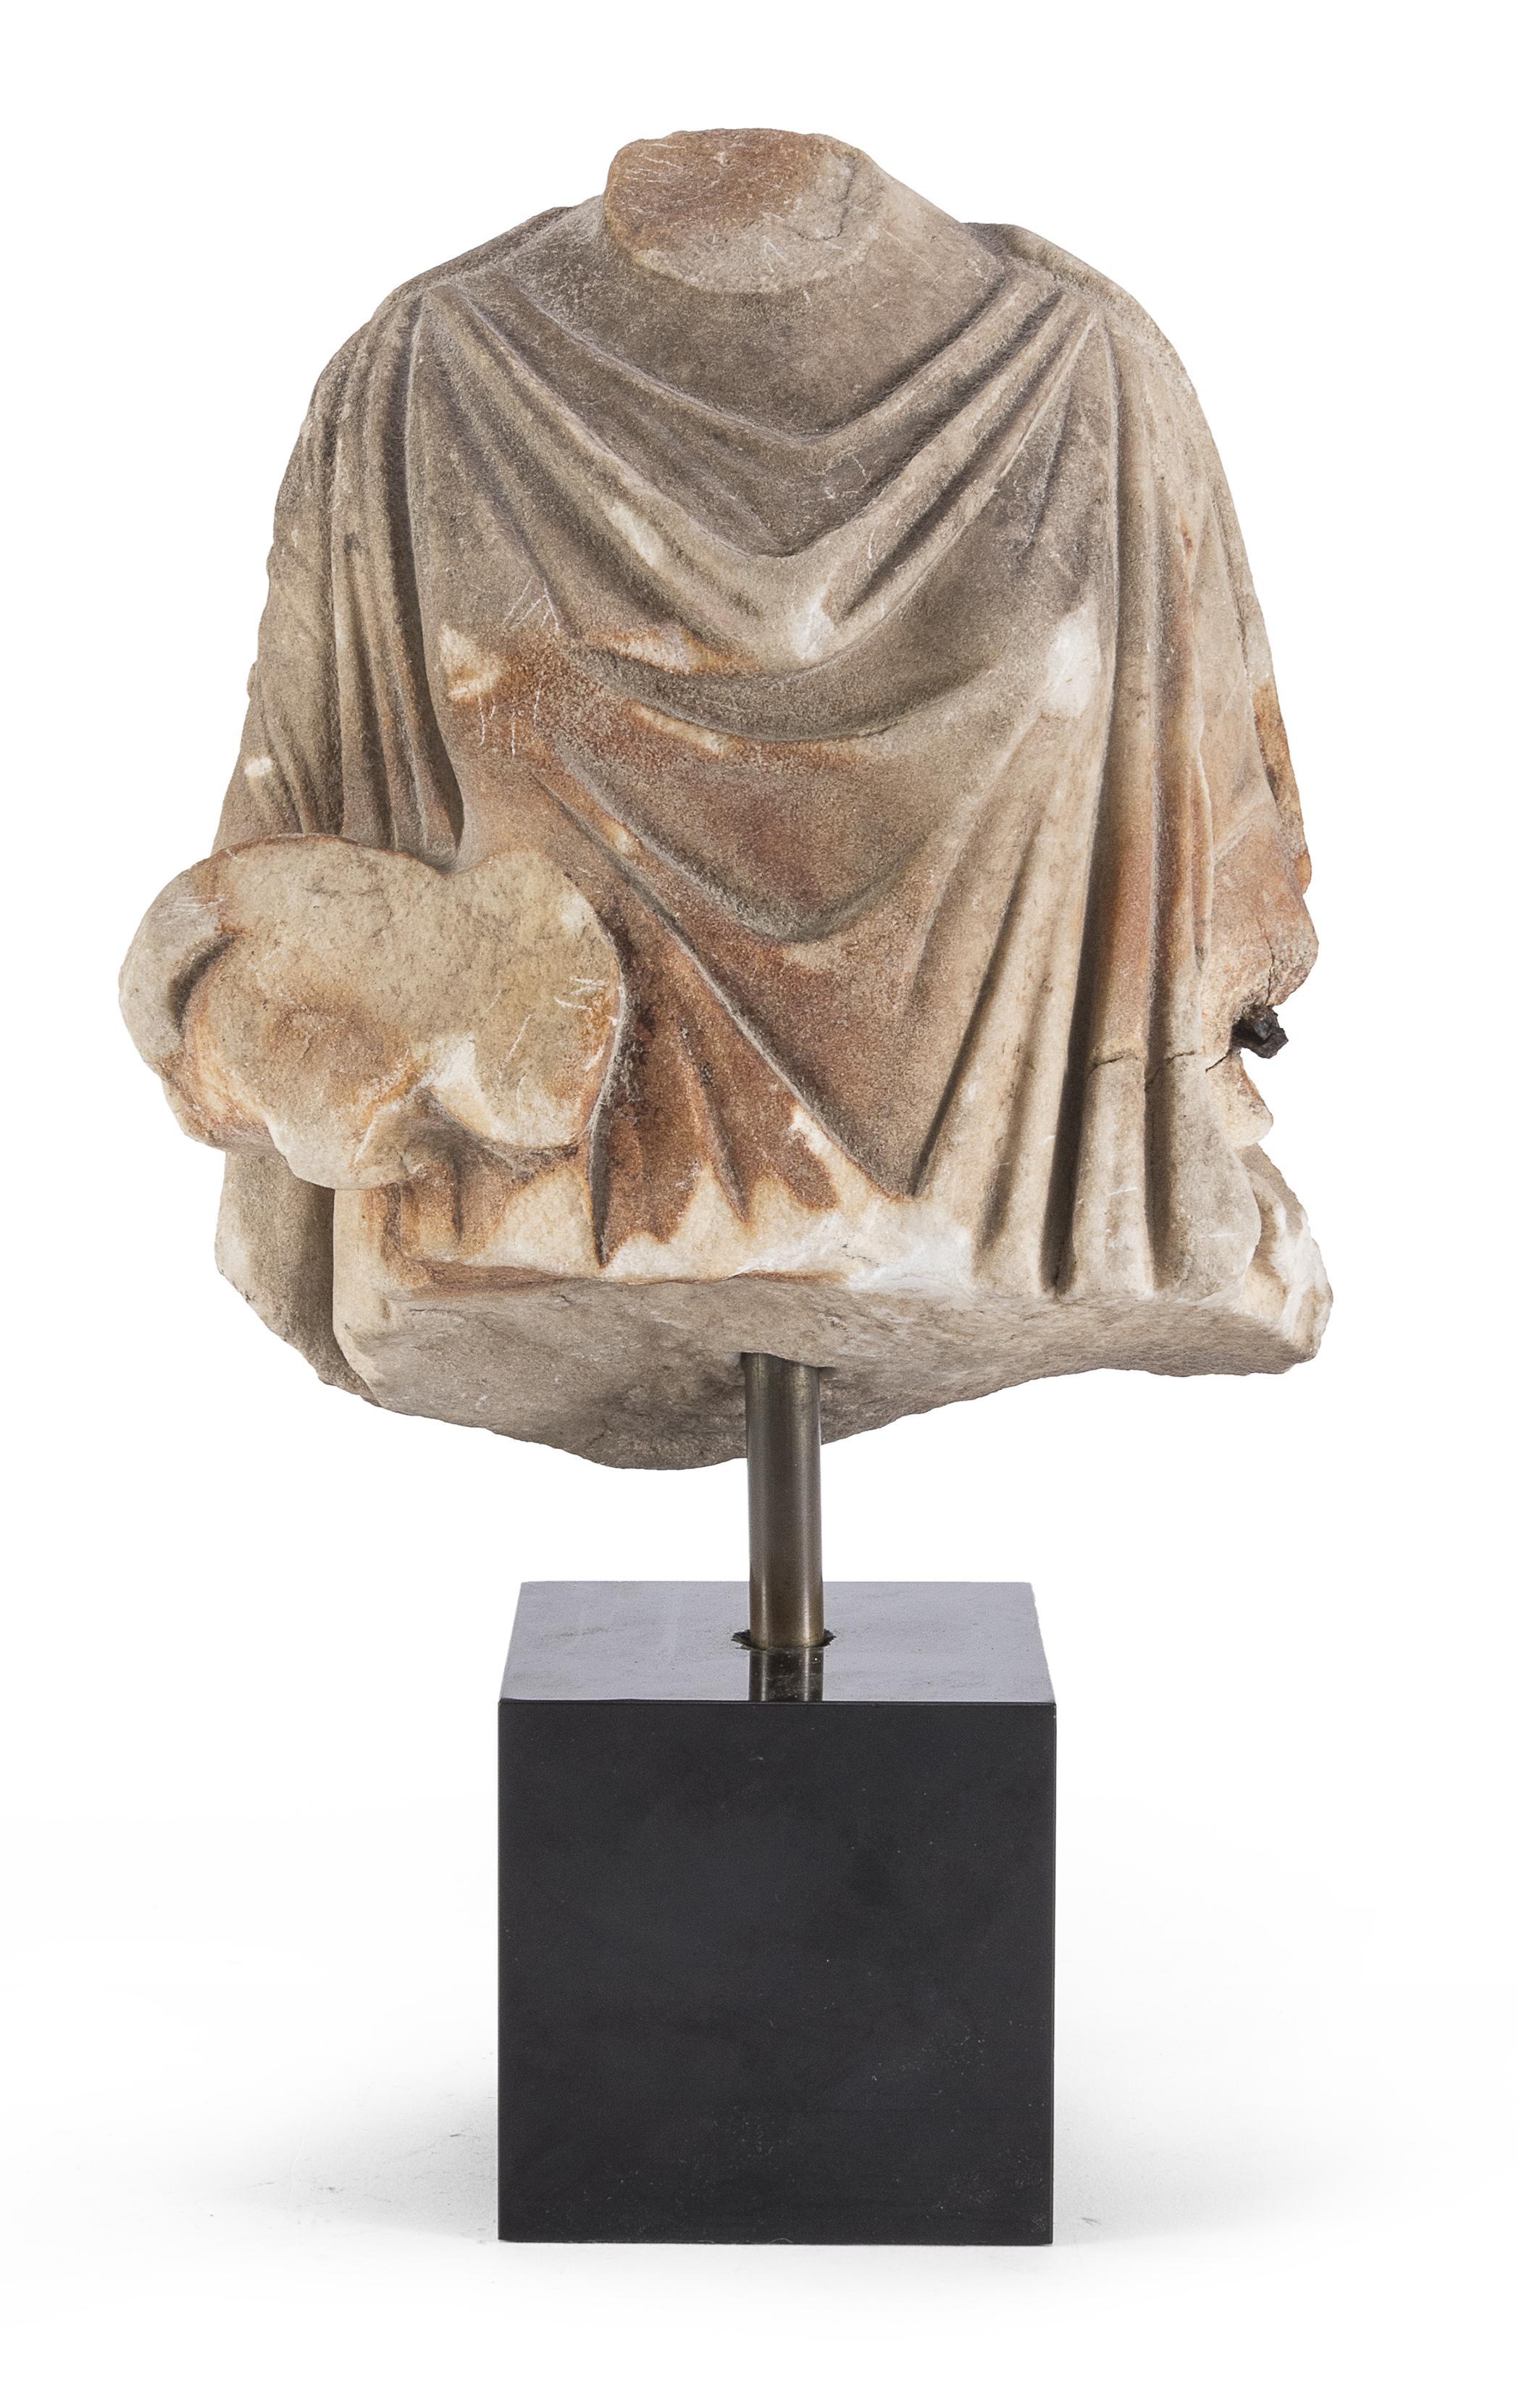 Beautiful Roman marble torso, most possibly depicting the Goddess Venus, draped with a Toga.
Beautiful accent piece,
2nd-3rd century AD, Rome. Authentified by the Sopraintendenza archeologica in Rome.